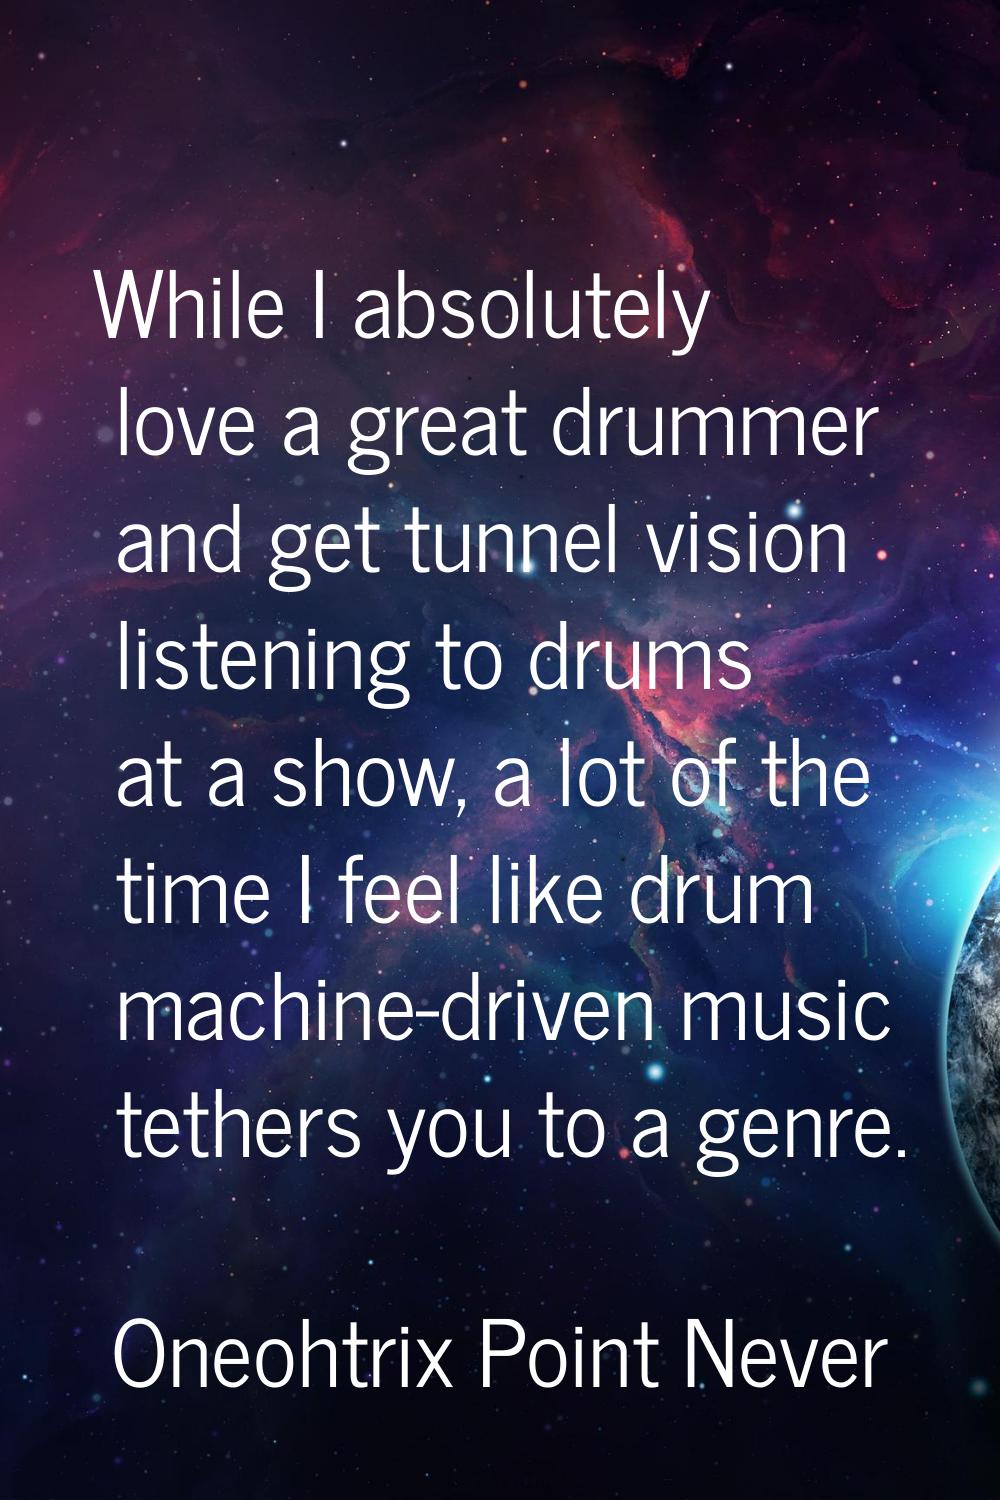 While I absolutely love a great drummer and get tunnel vision listening to drums at a show, a lot o